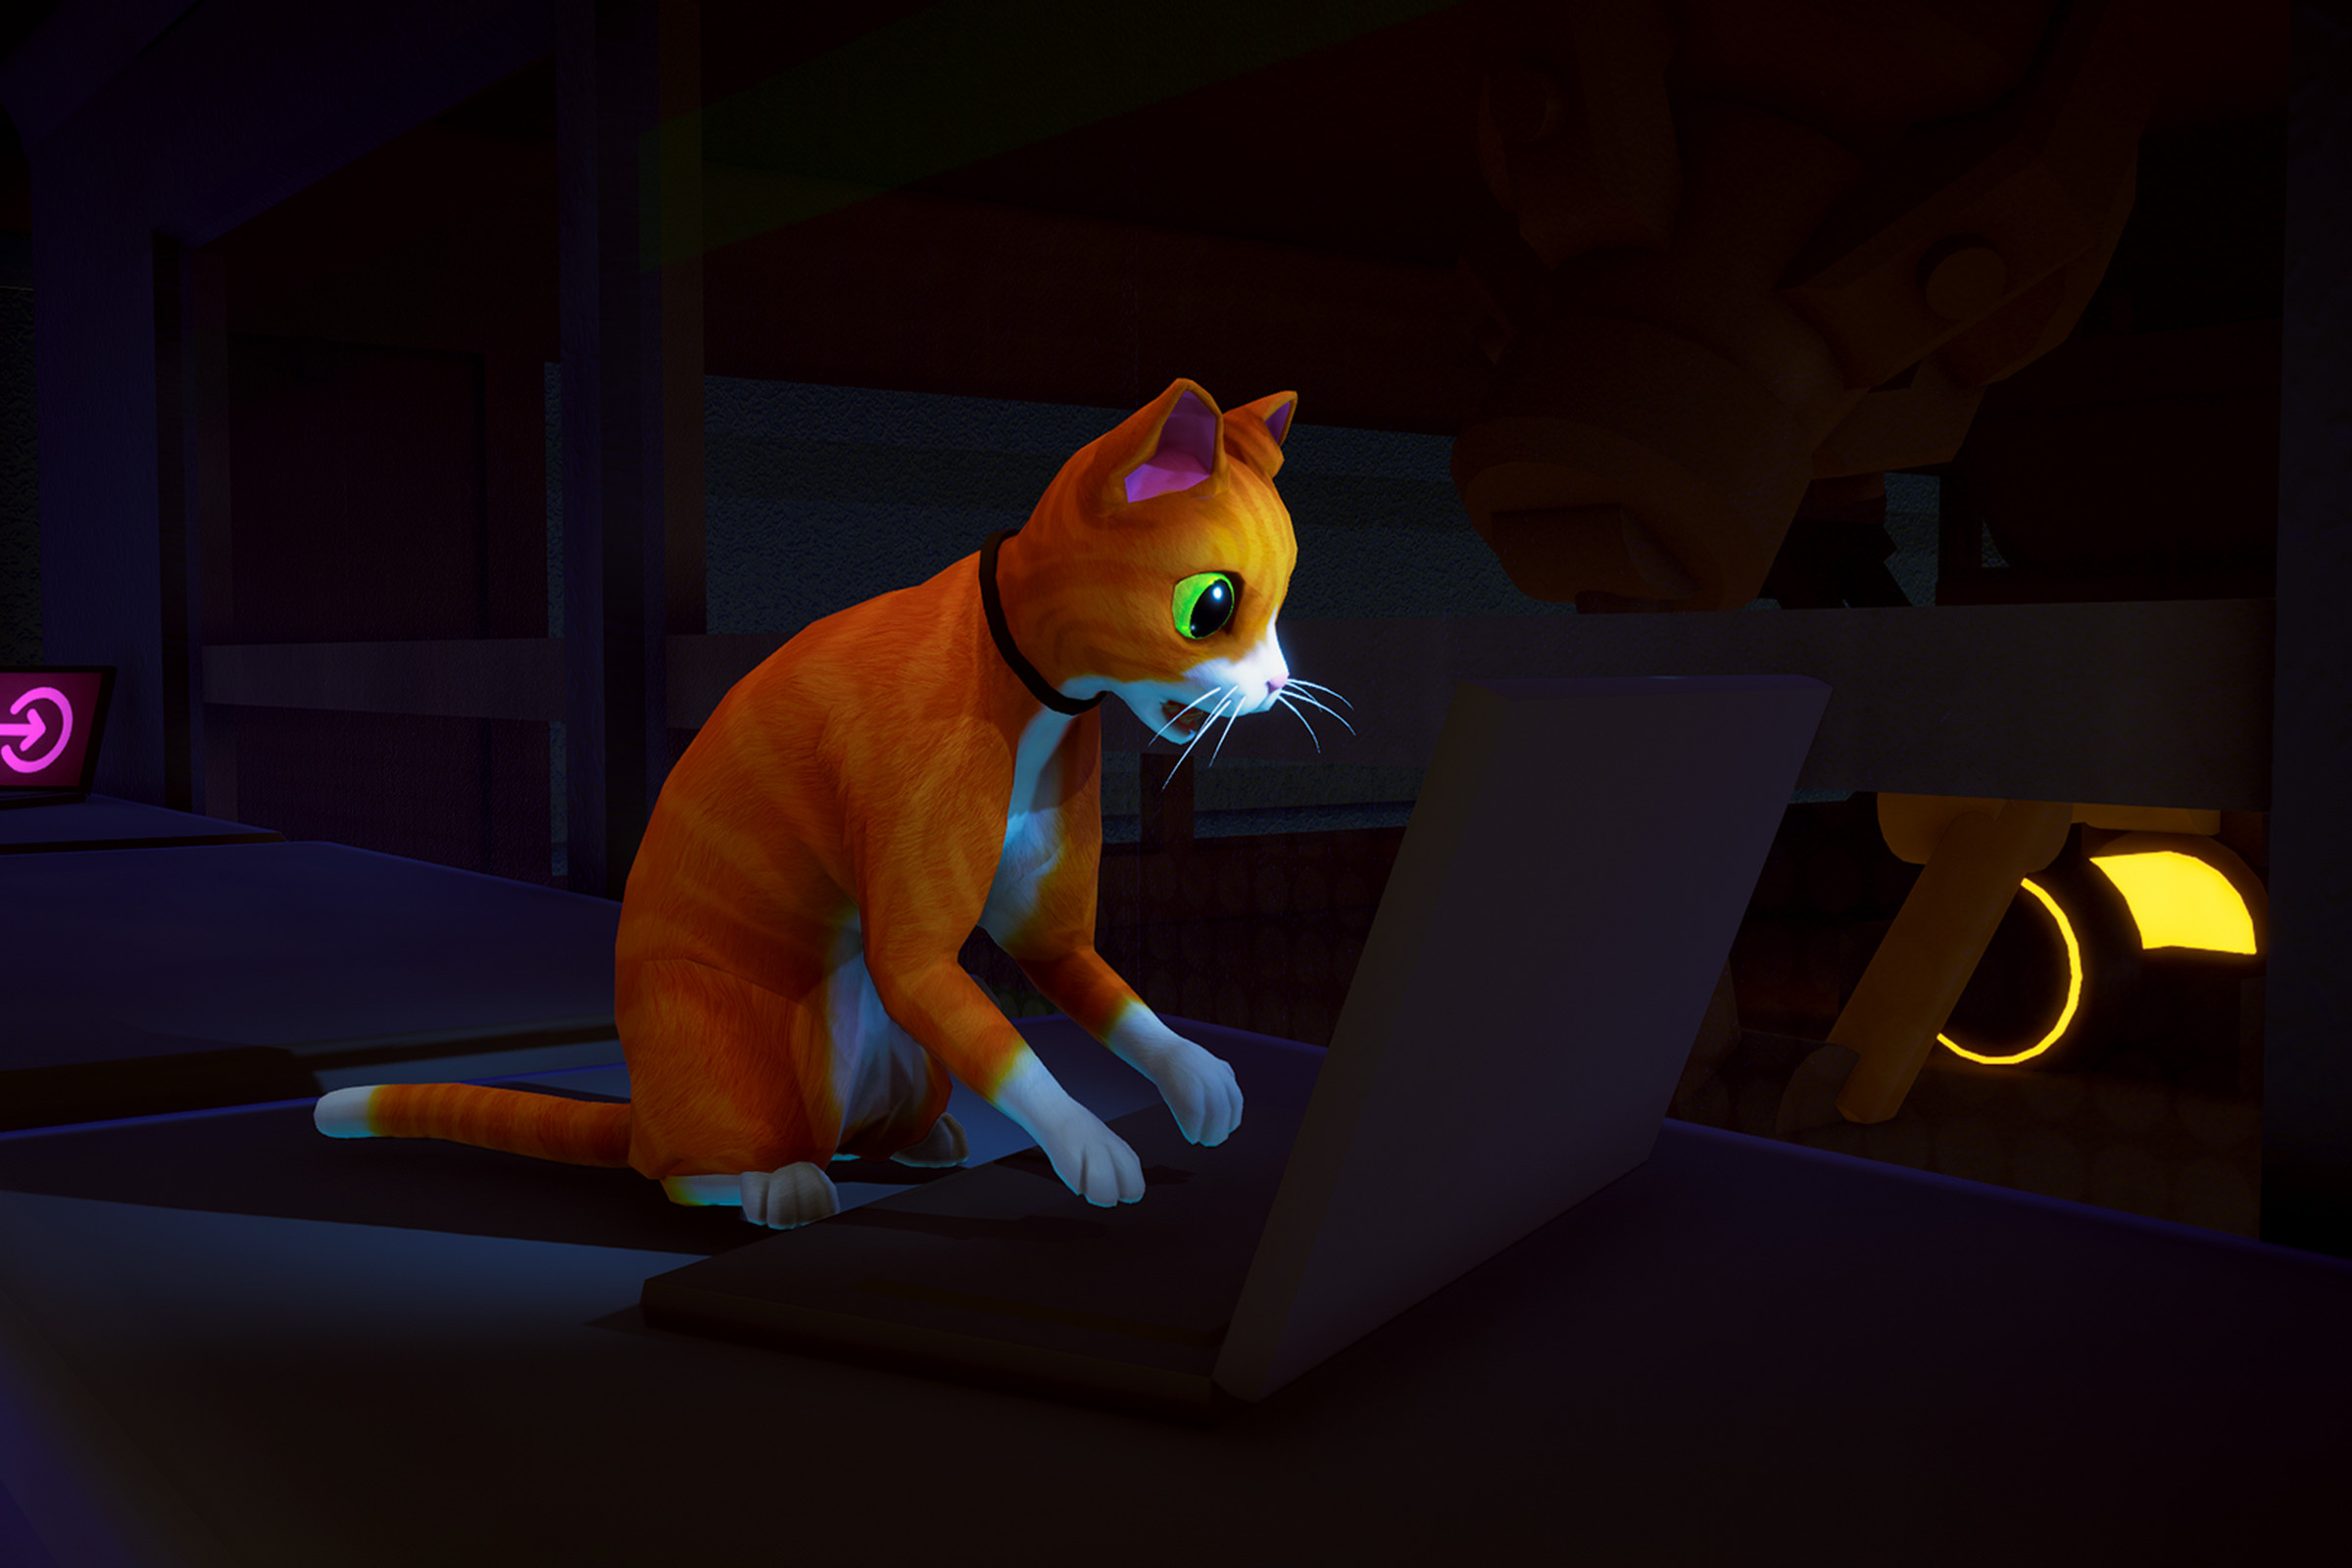 Schrödinger’s Cat Burglar is one of the games supported by the fund.